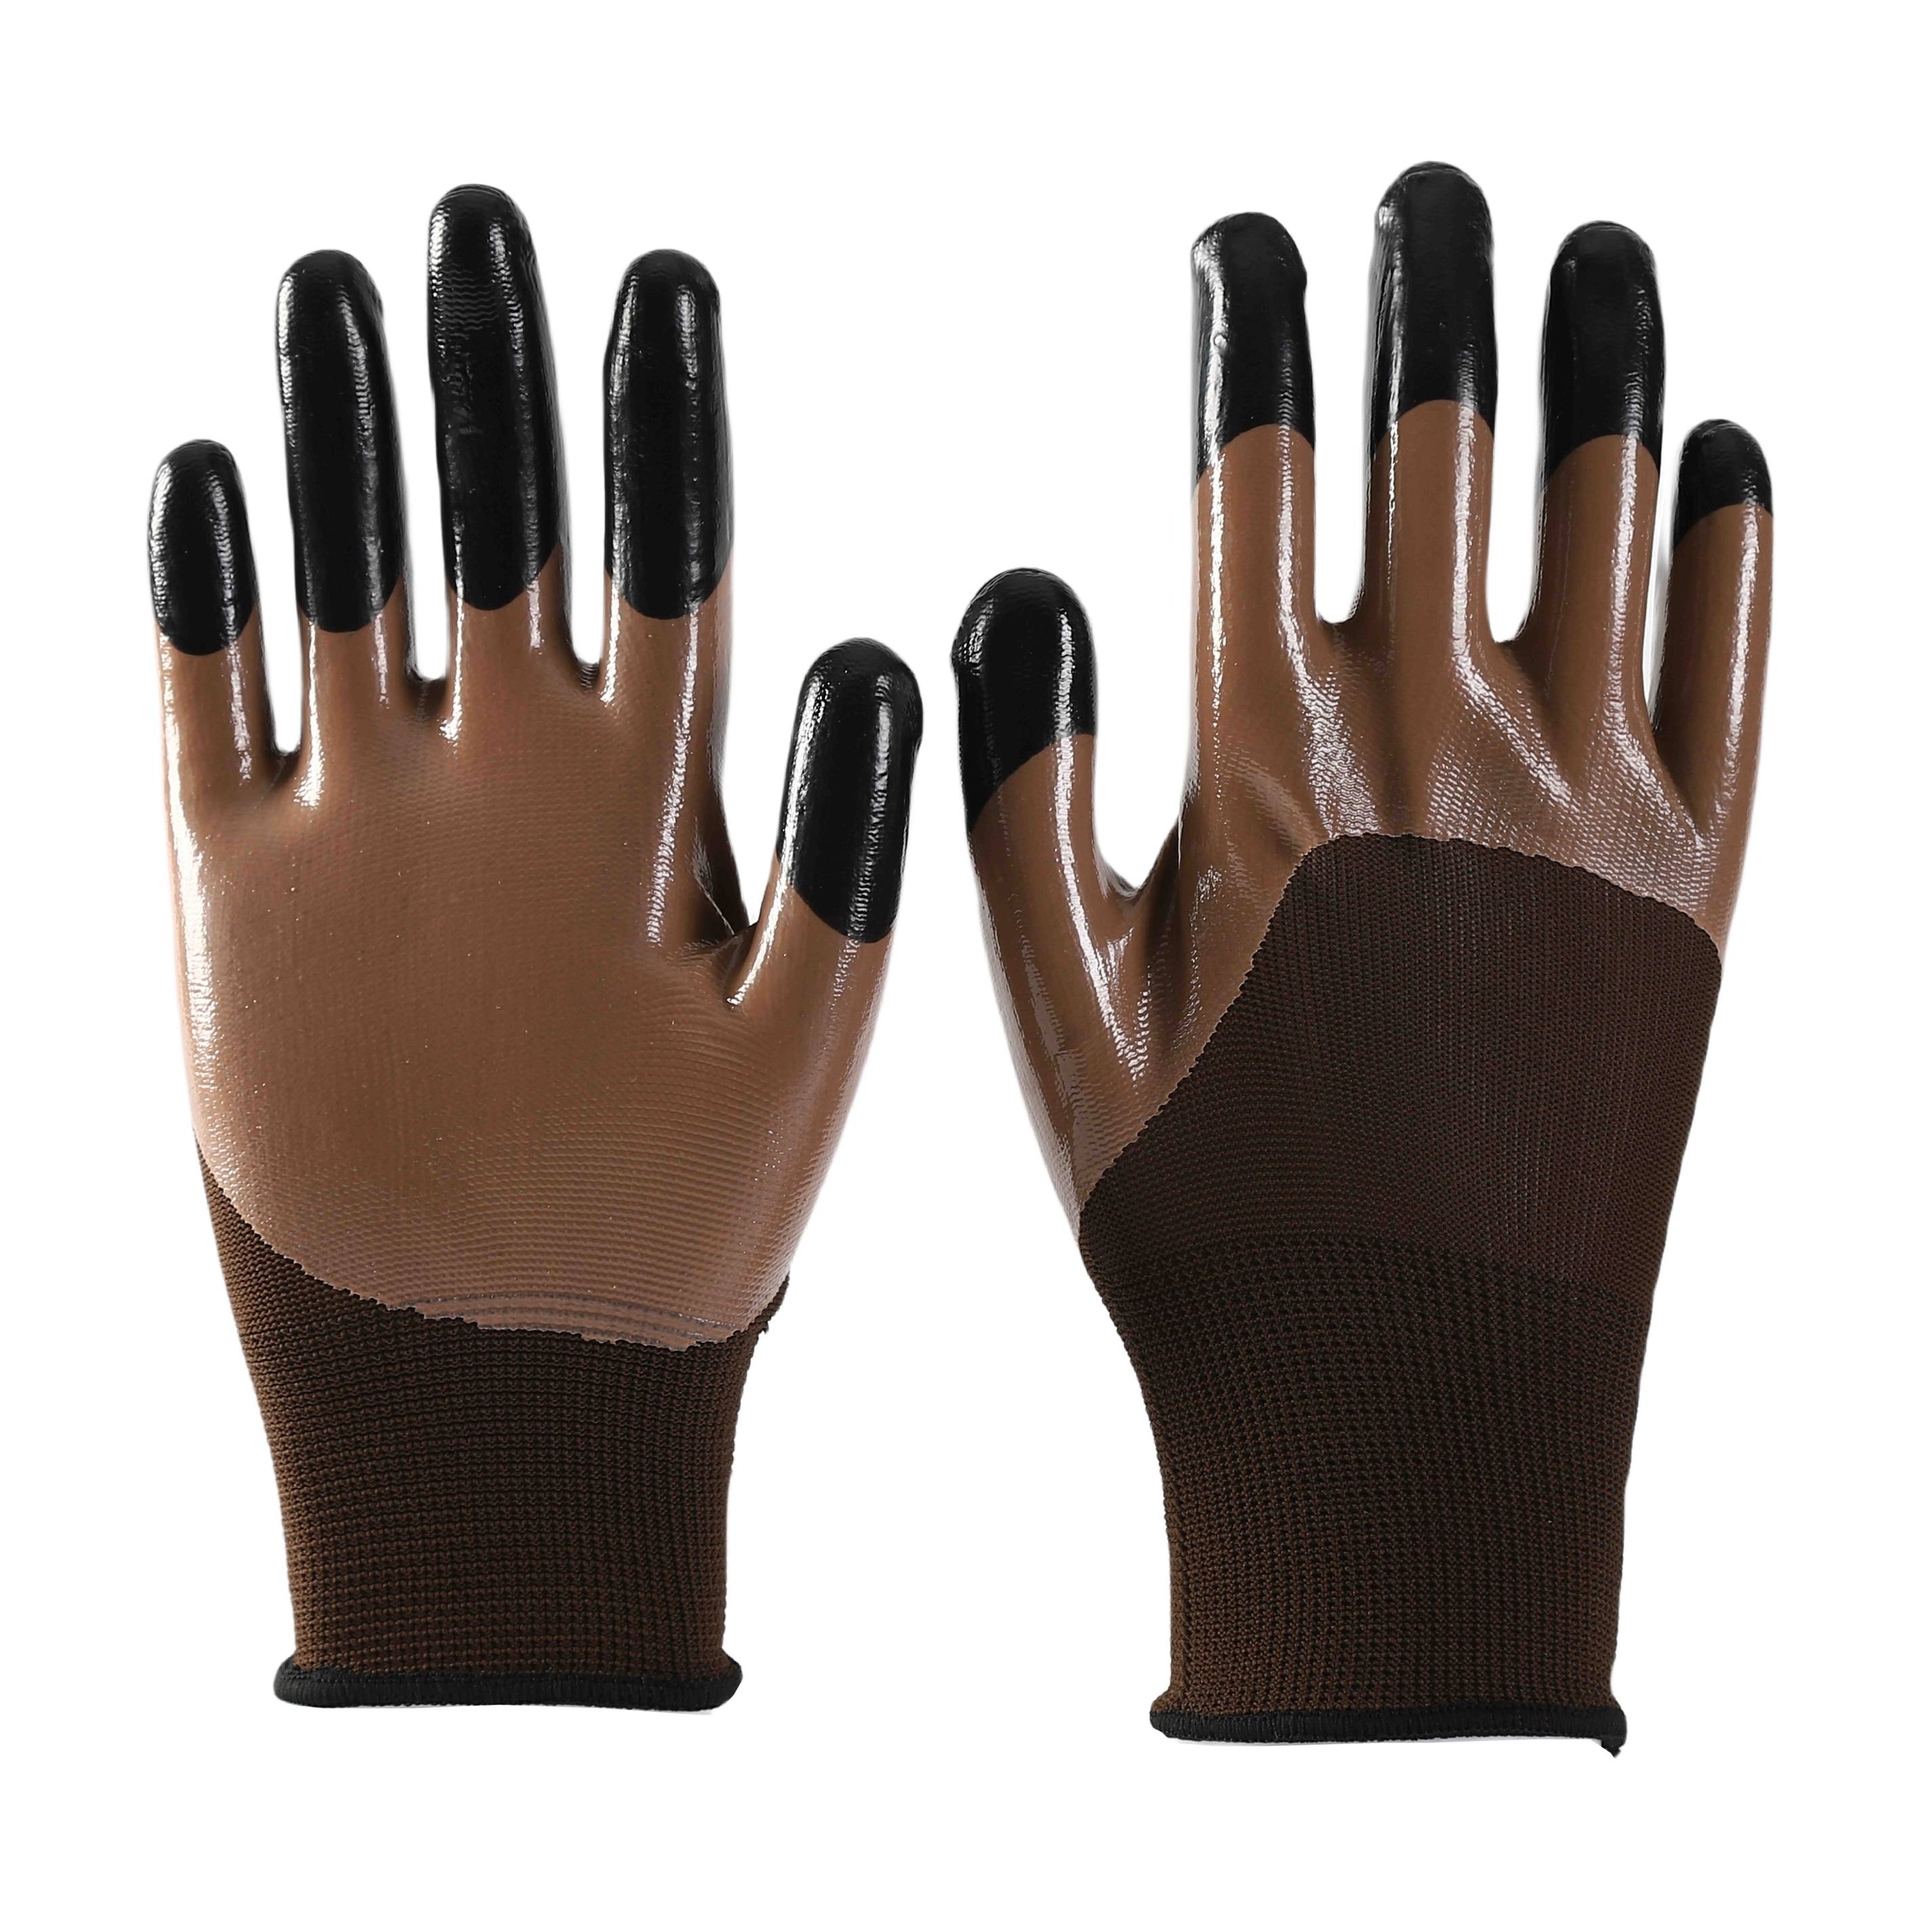                 Brown polyester with brown nitrile Half Coated  Gloves            